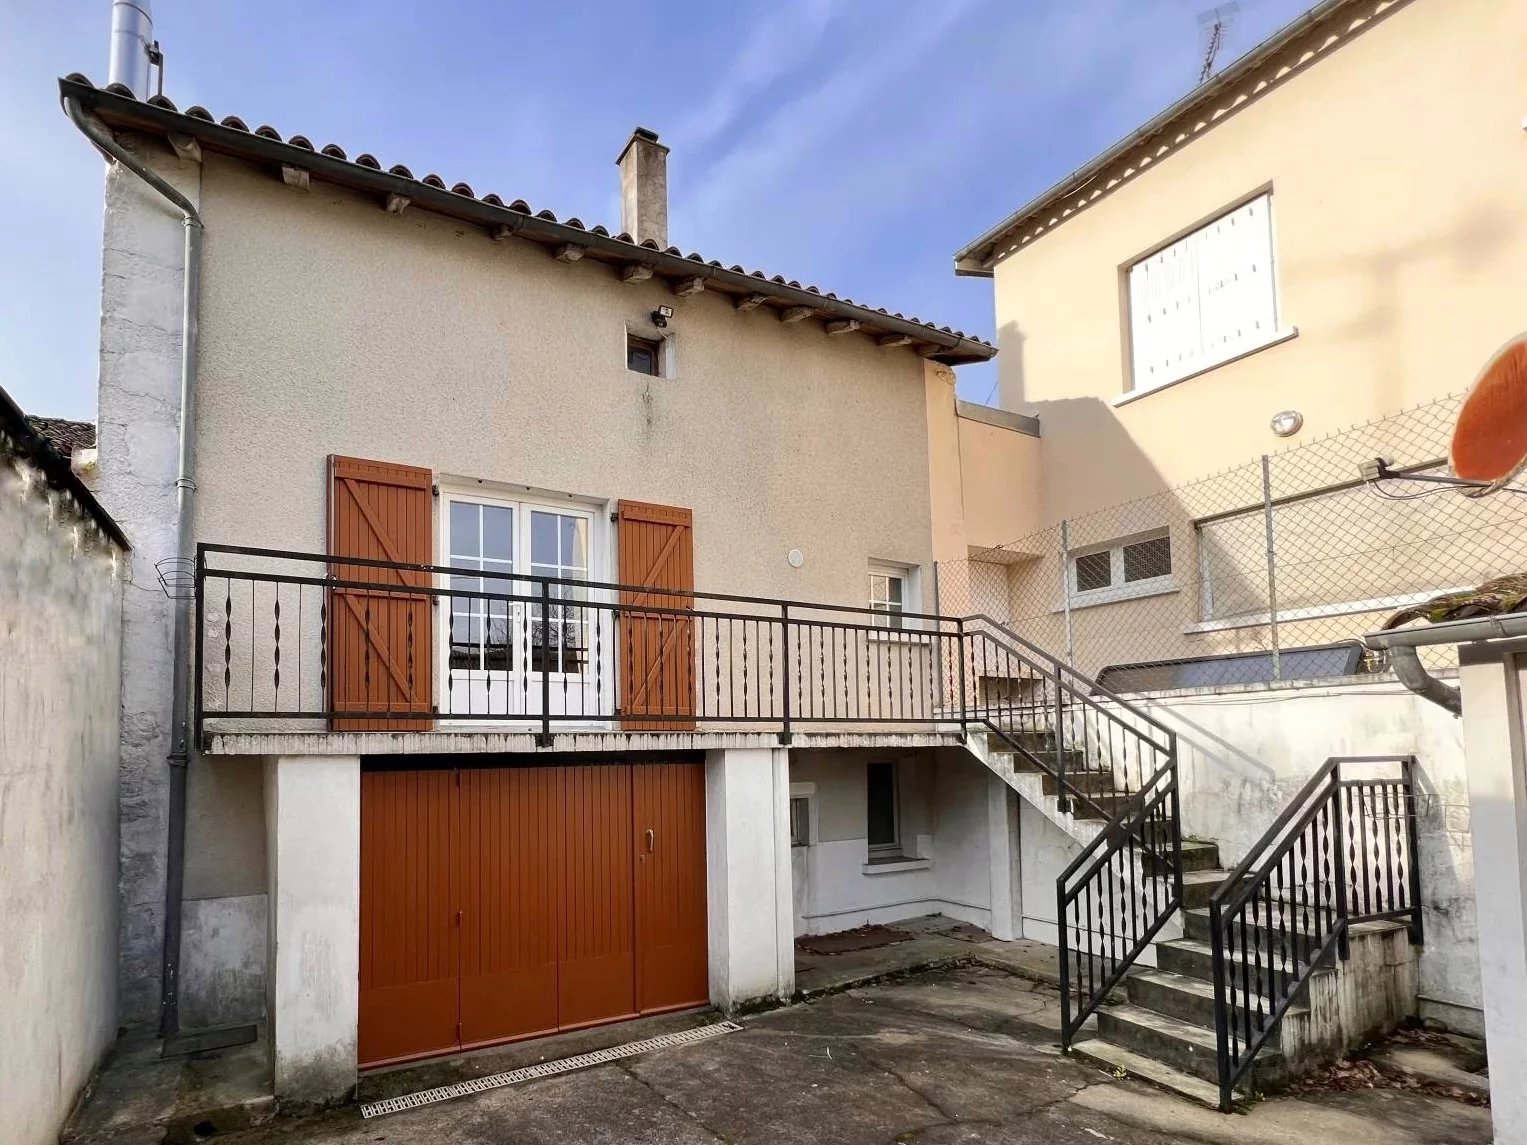 Spacious townhouse with 4 bedrooms and close to all amenities